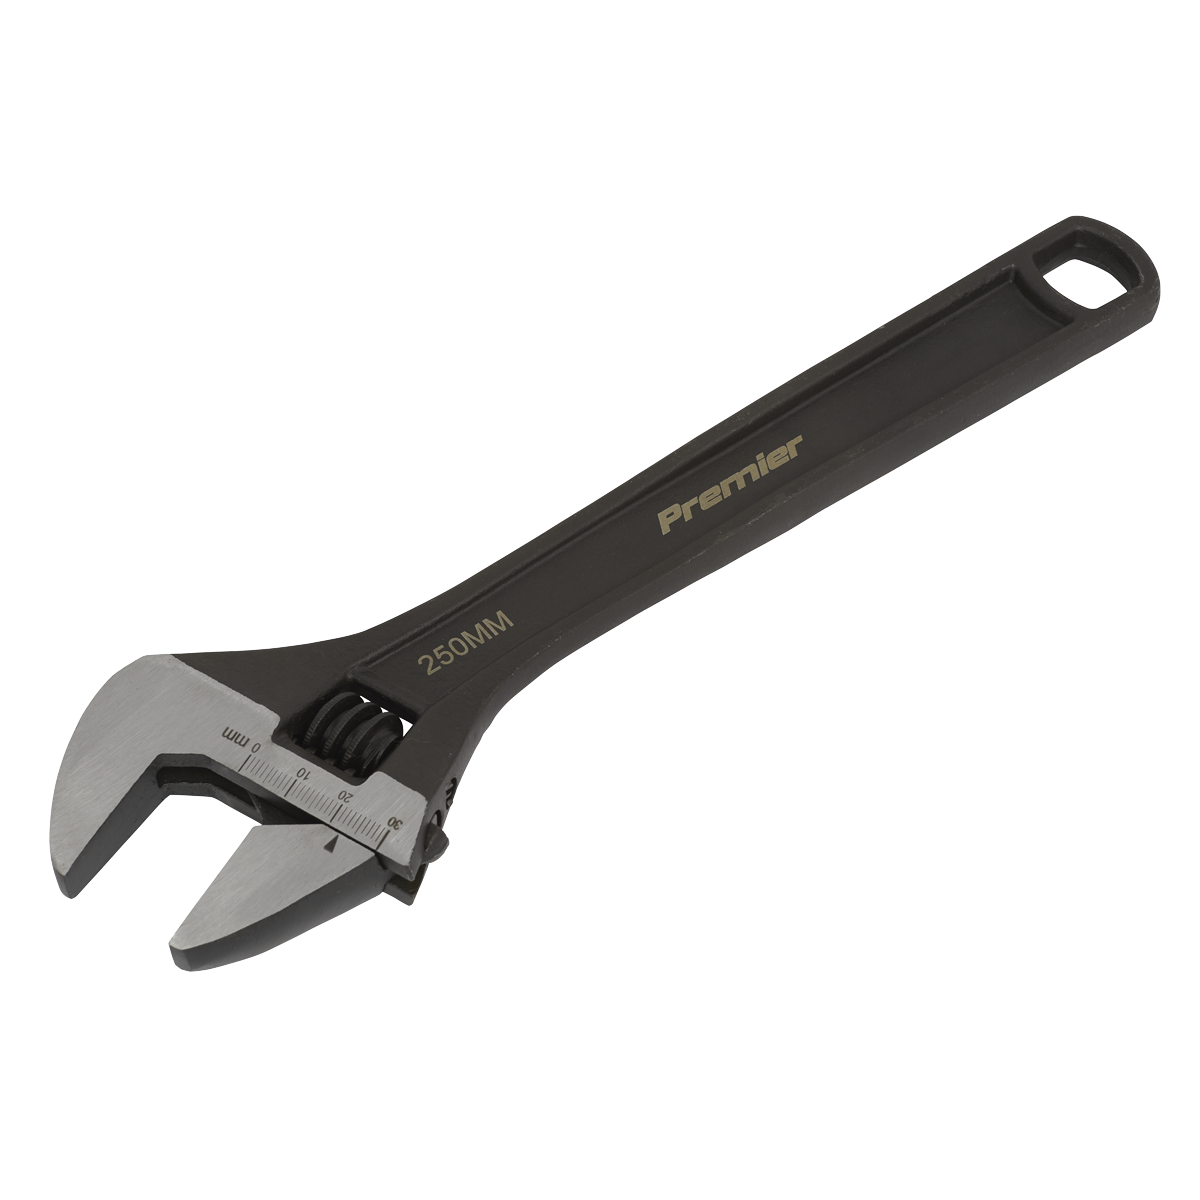 Adjustable Wrench 250mm - AK9562 - Farming Parts